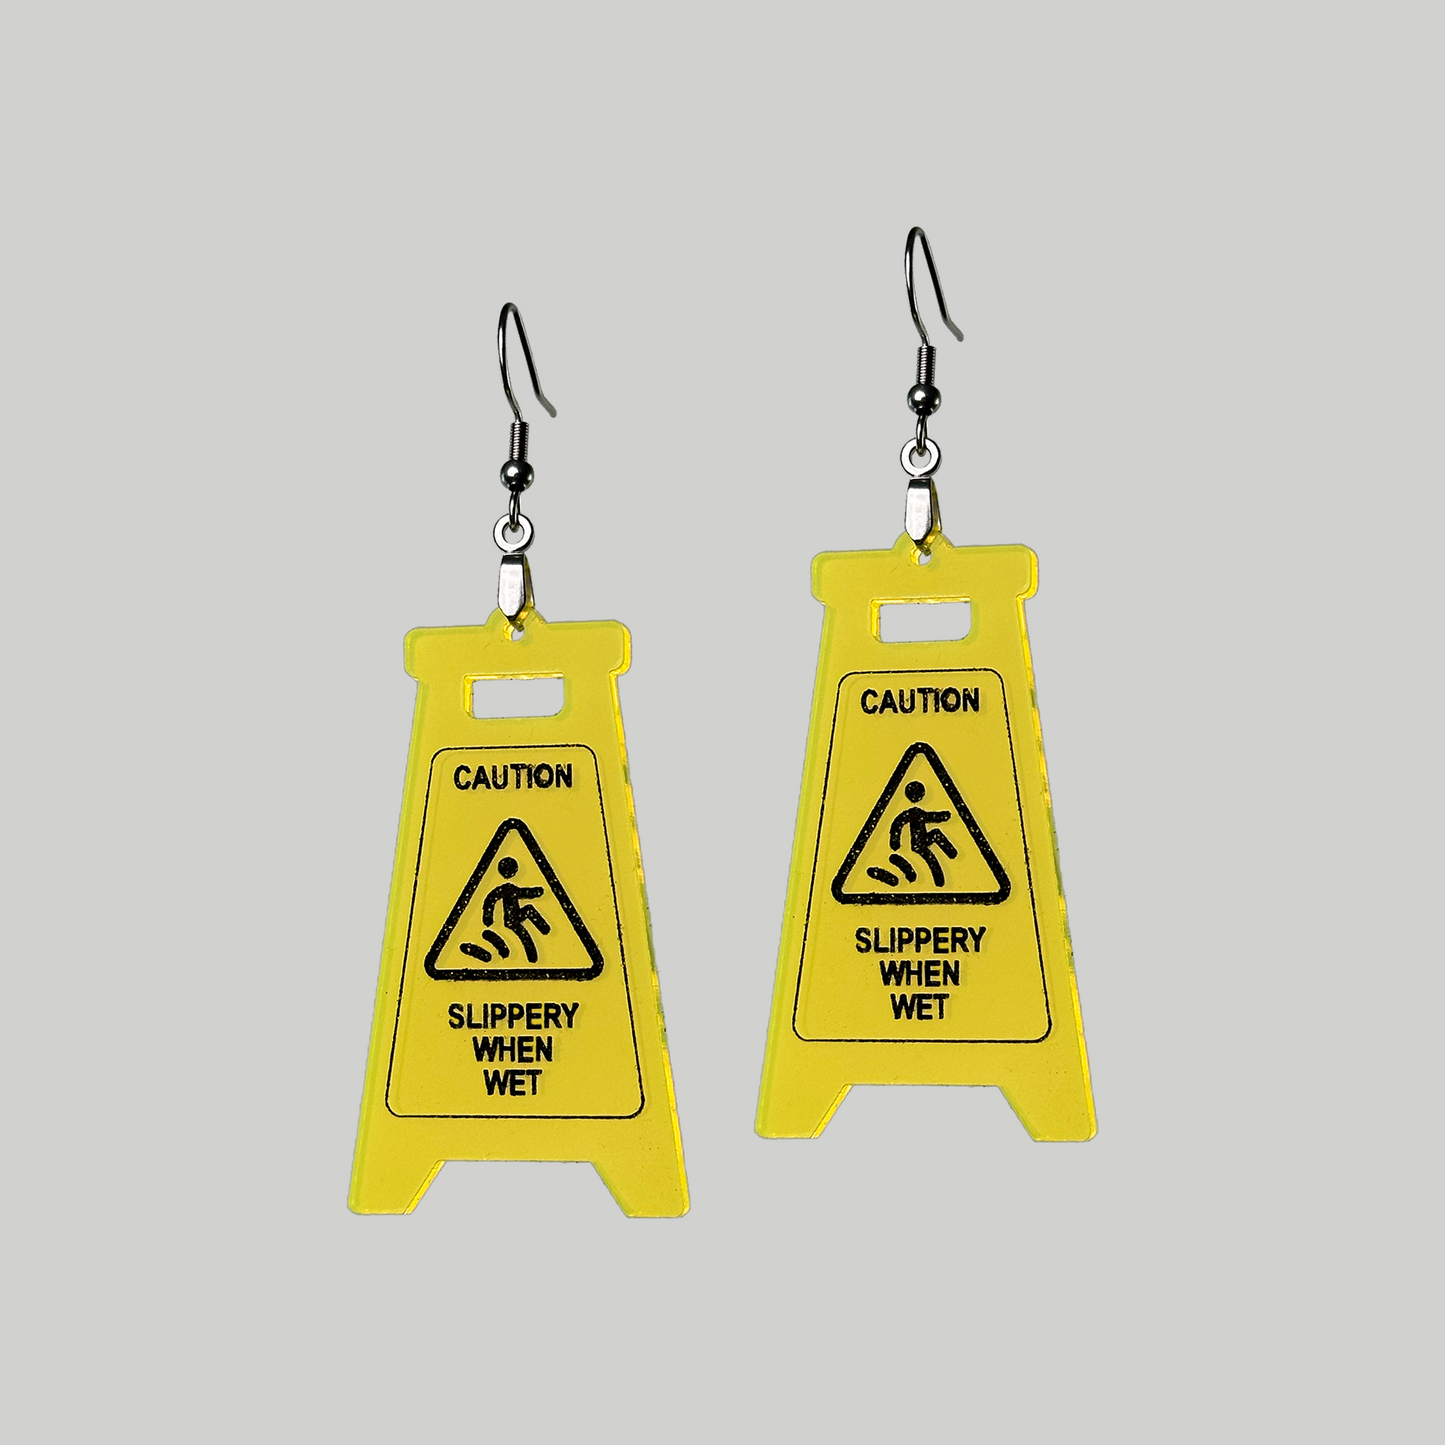 Slippery When Wet Earrings: Playful and unique, these earrings feature caution sign in a fun yellow and black color.